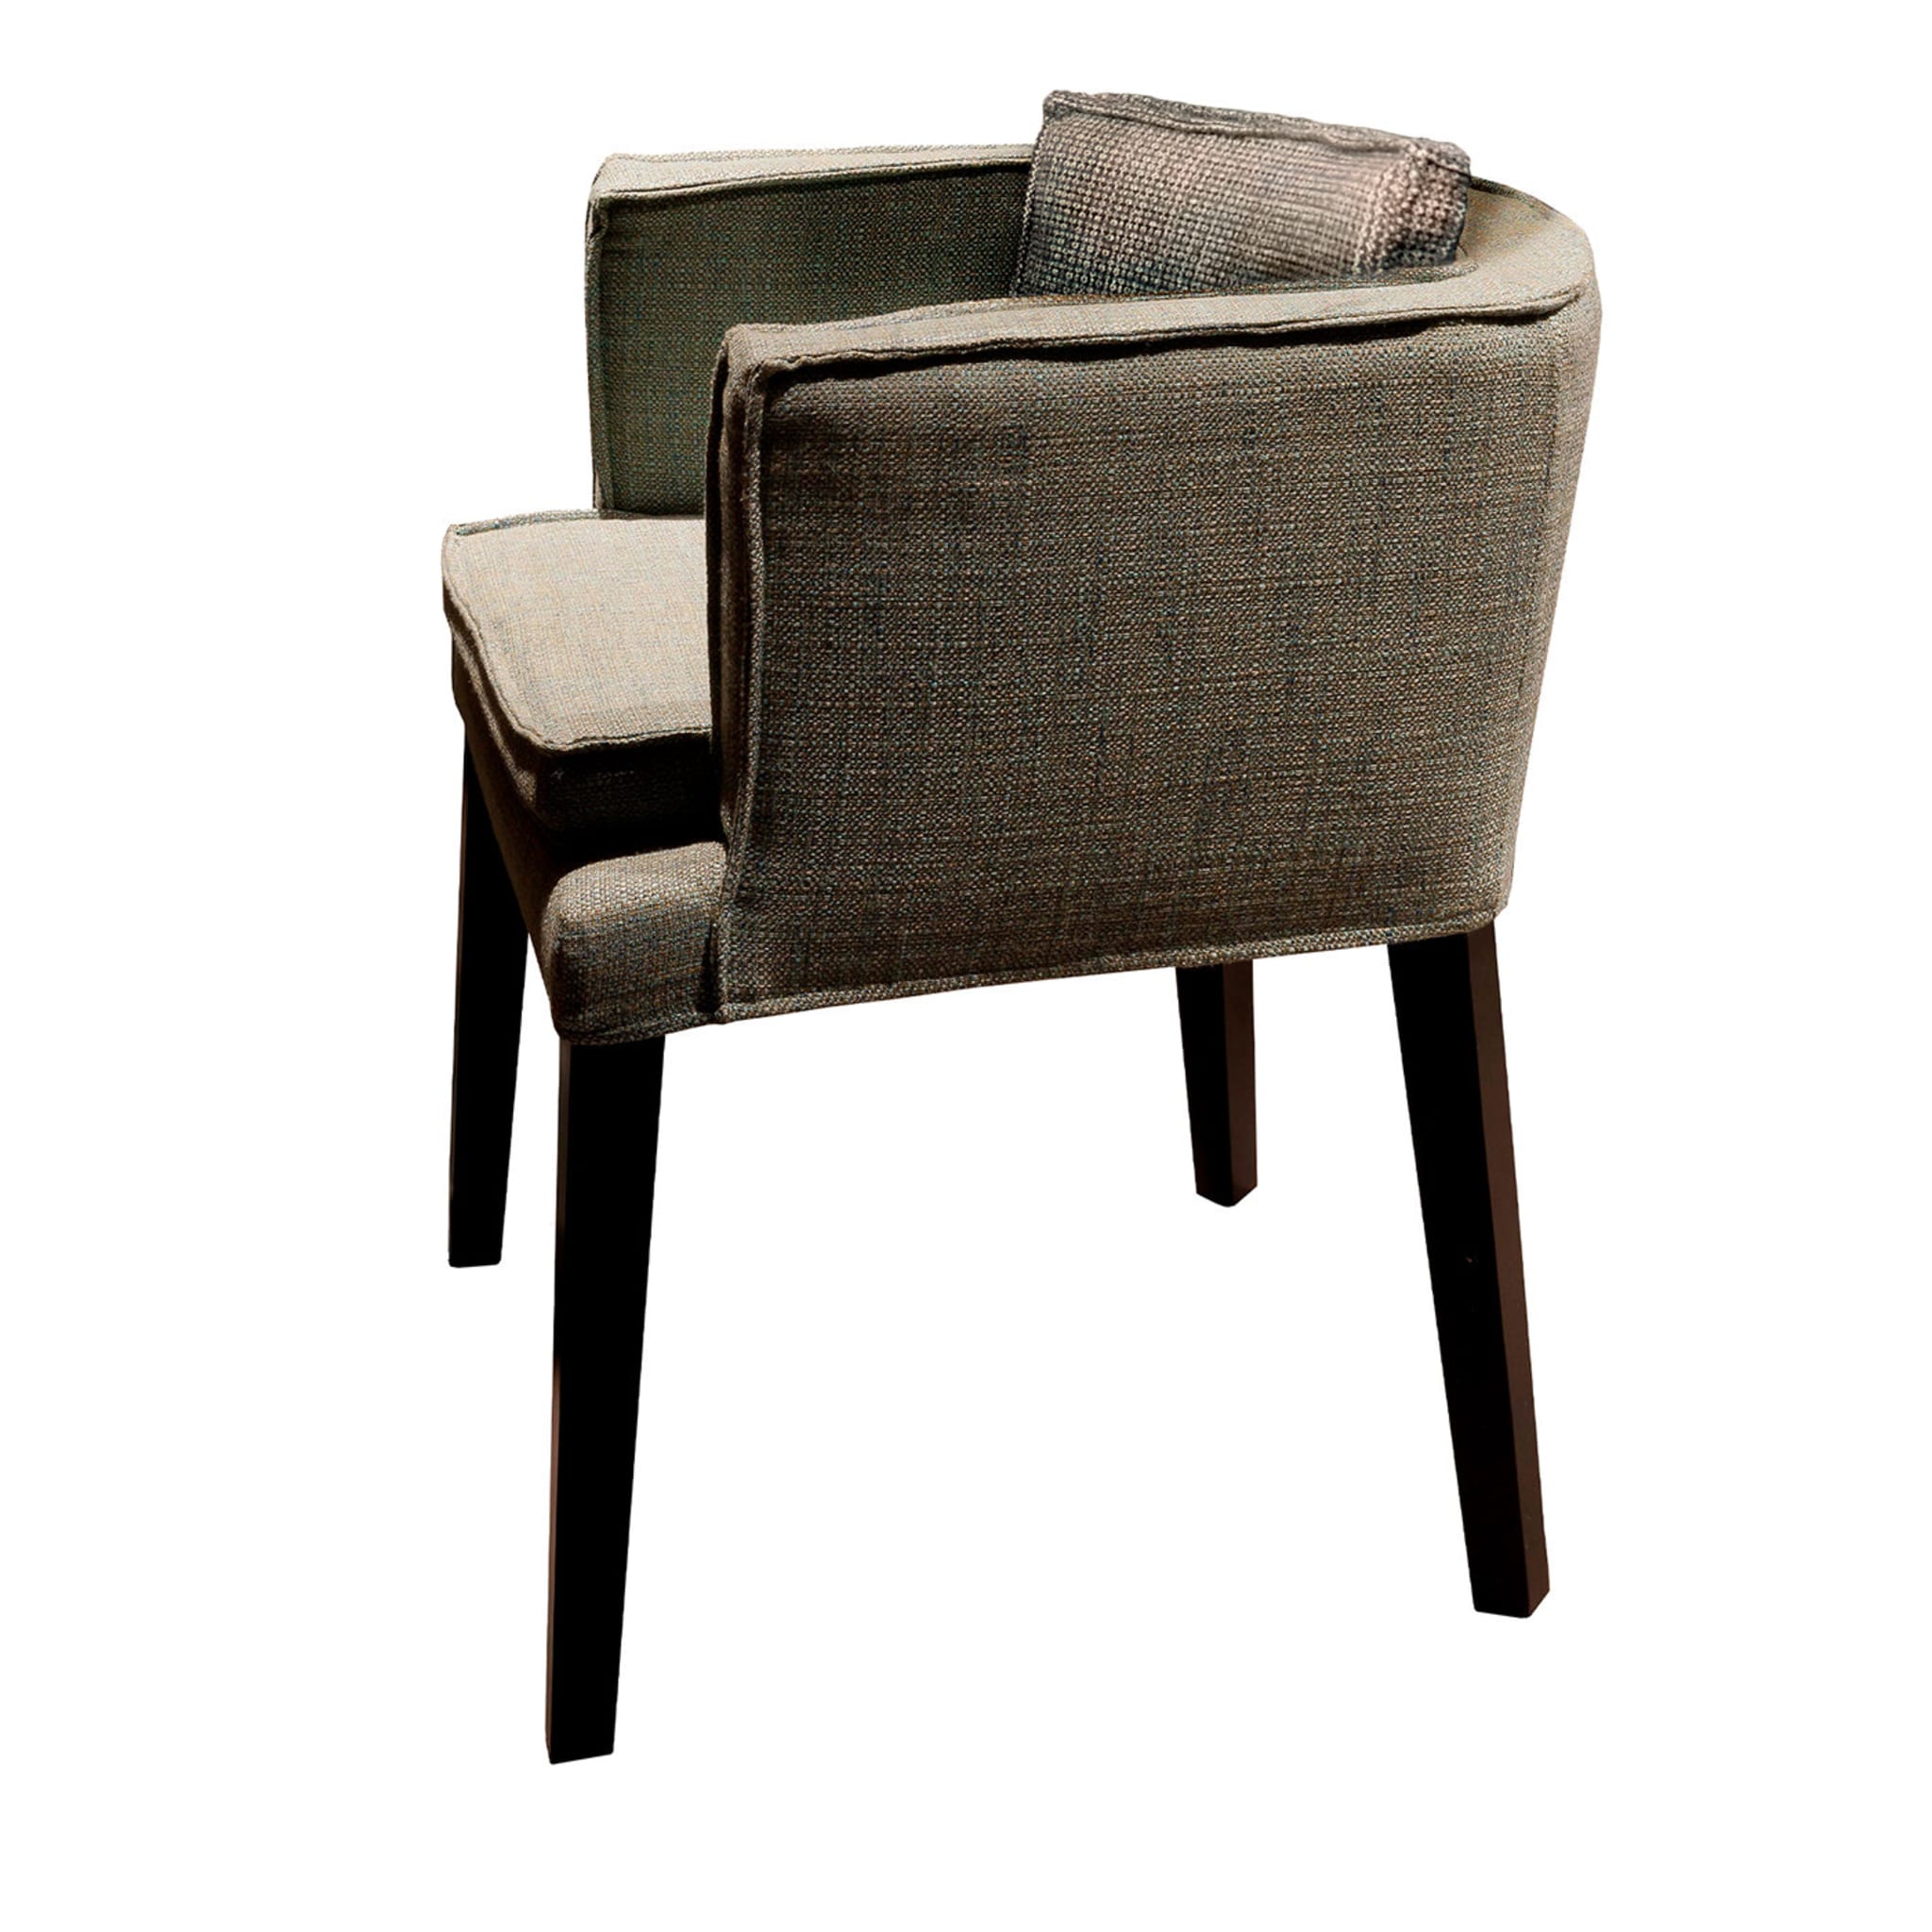 Key Young Dining chair - Main view